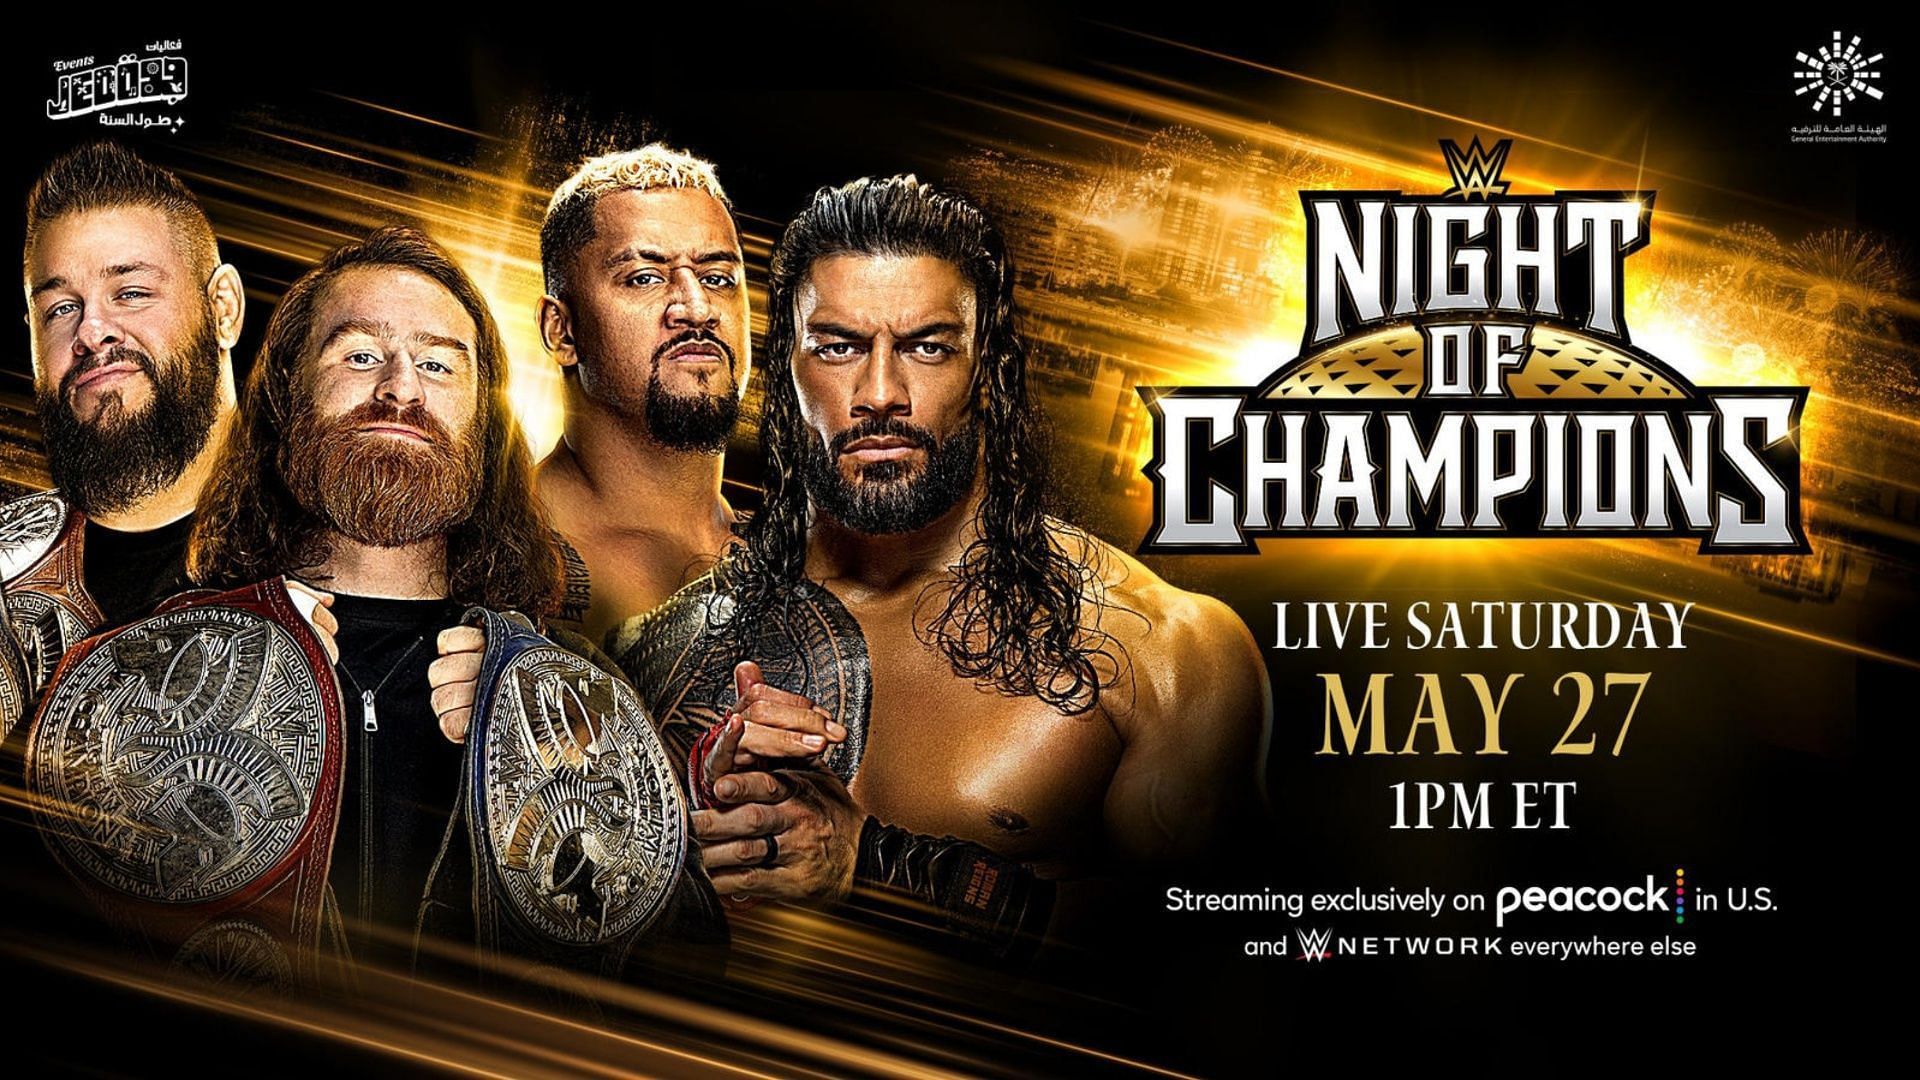 The Undisputed WWE Tag Team Championship will be up for grabs at Night of Champions 2023.